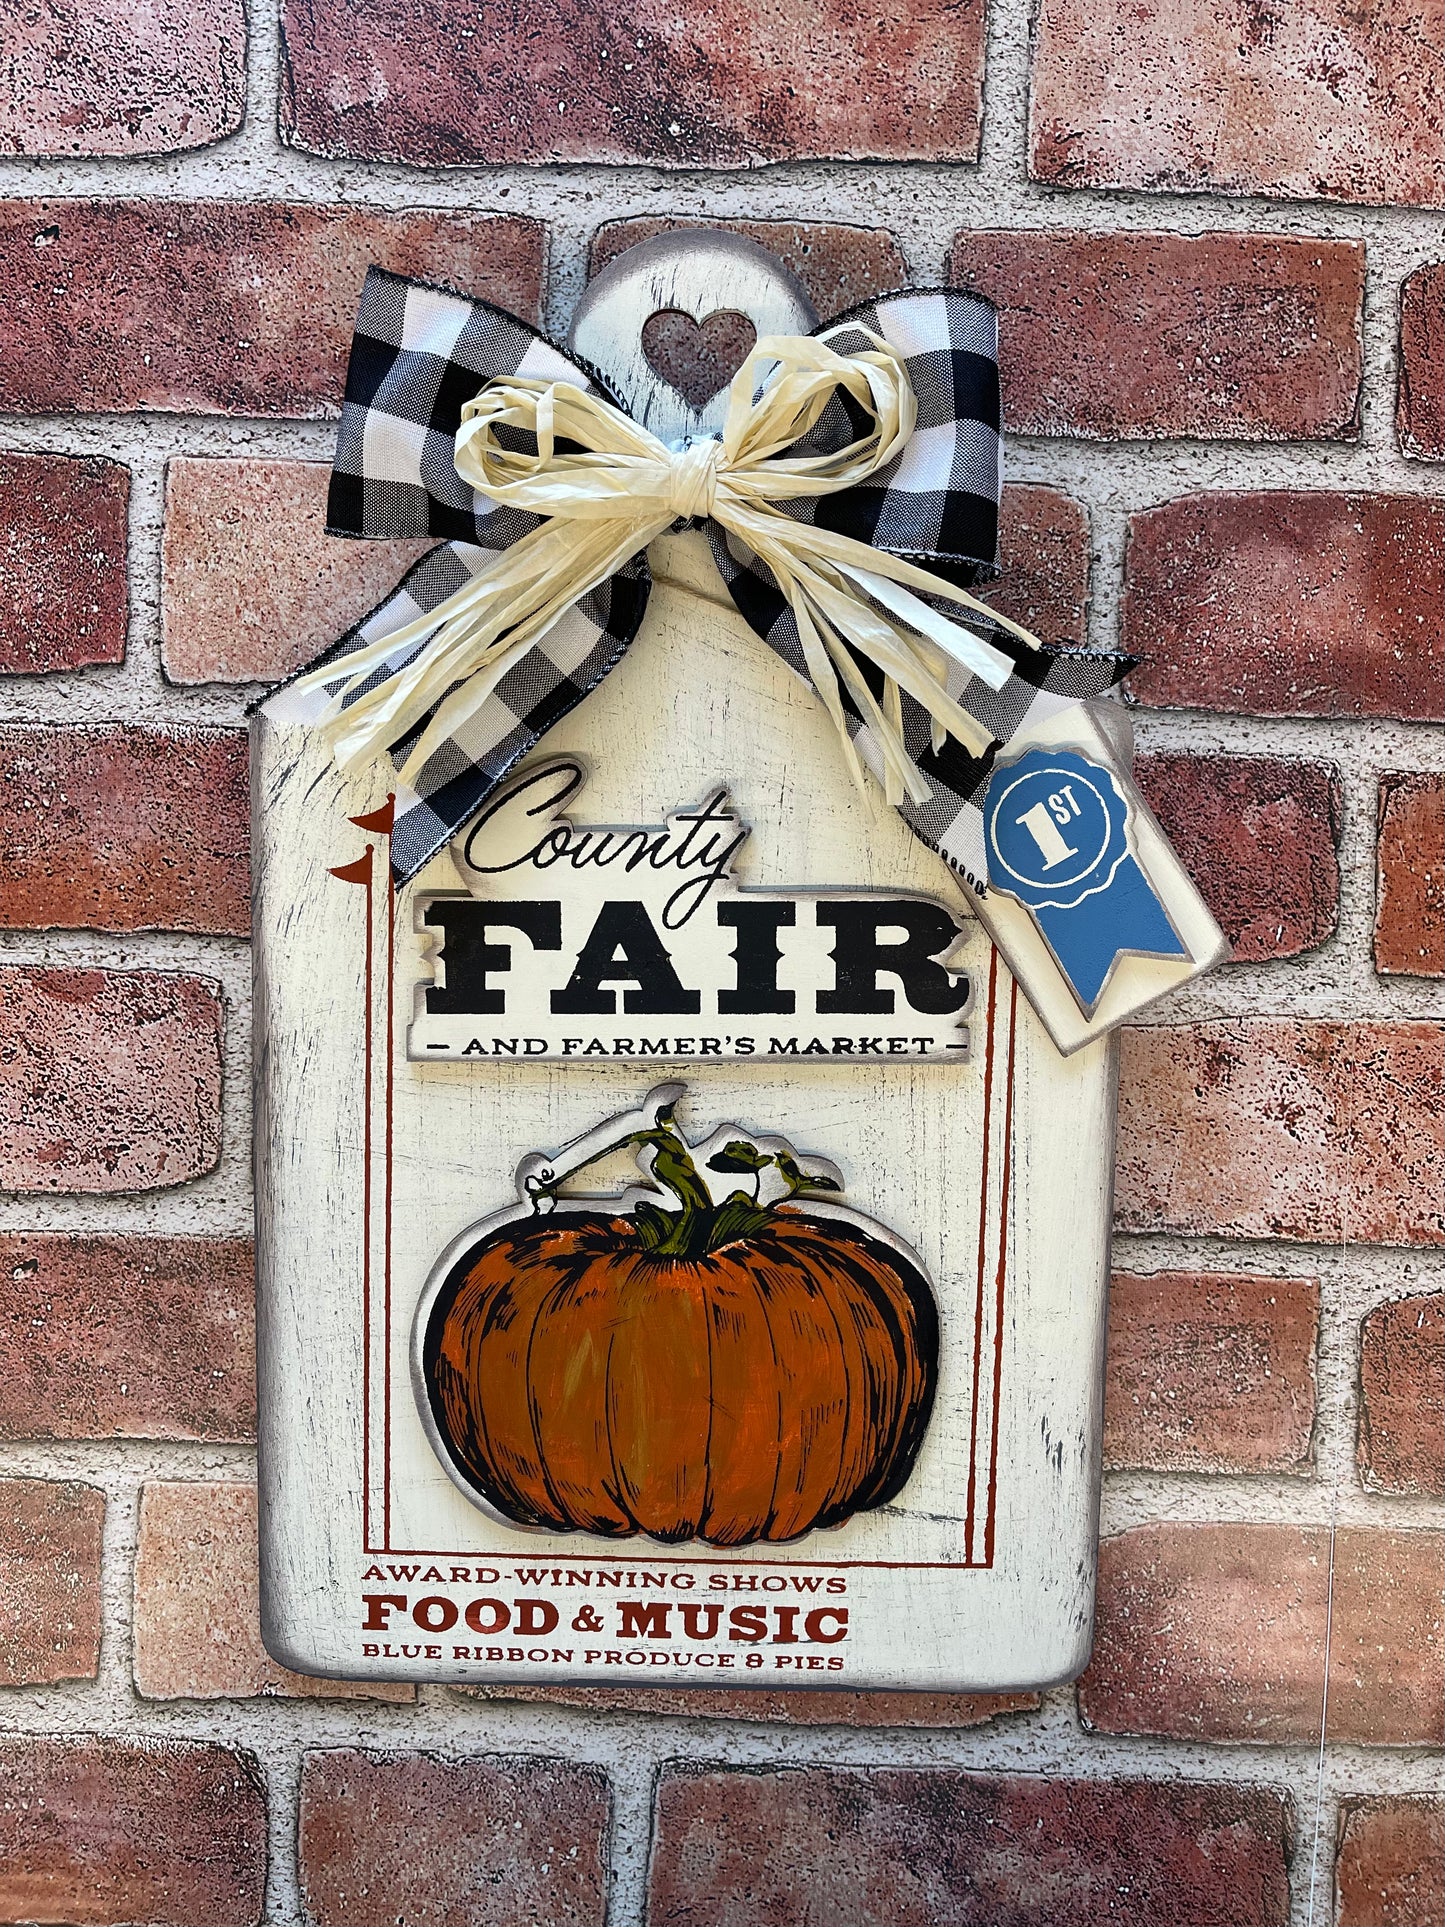 County Fair Cutting Board and cutouts - unpainted wooden cutouts, ready for you to paint